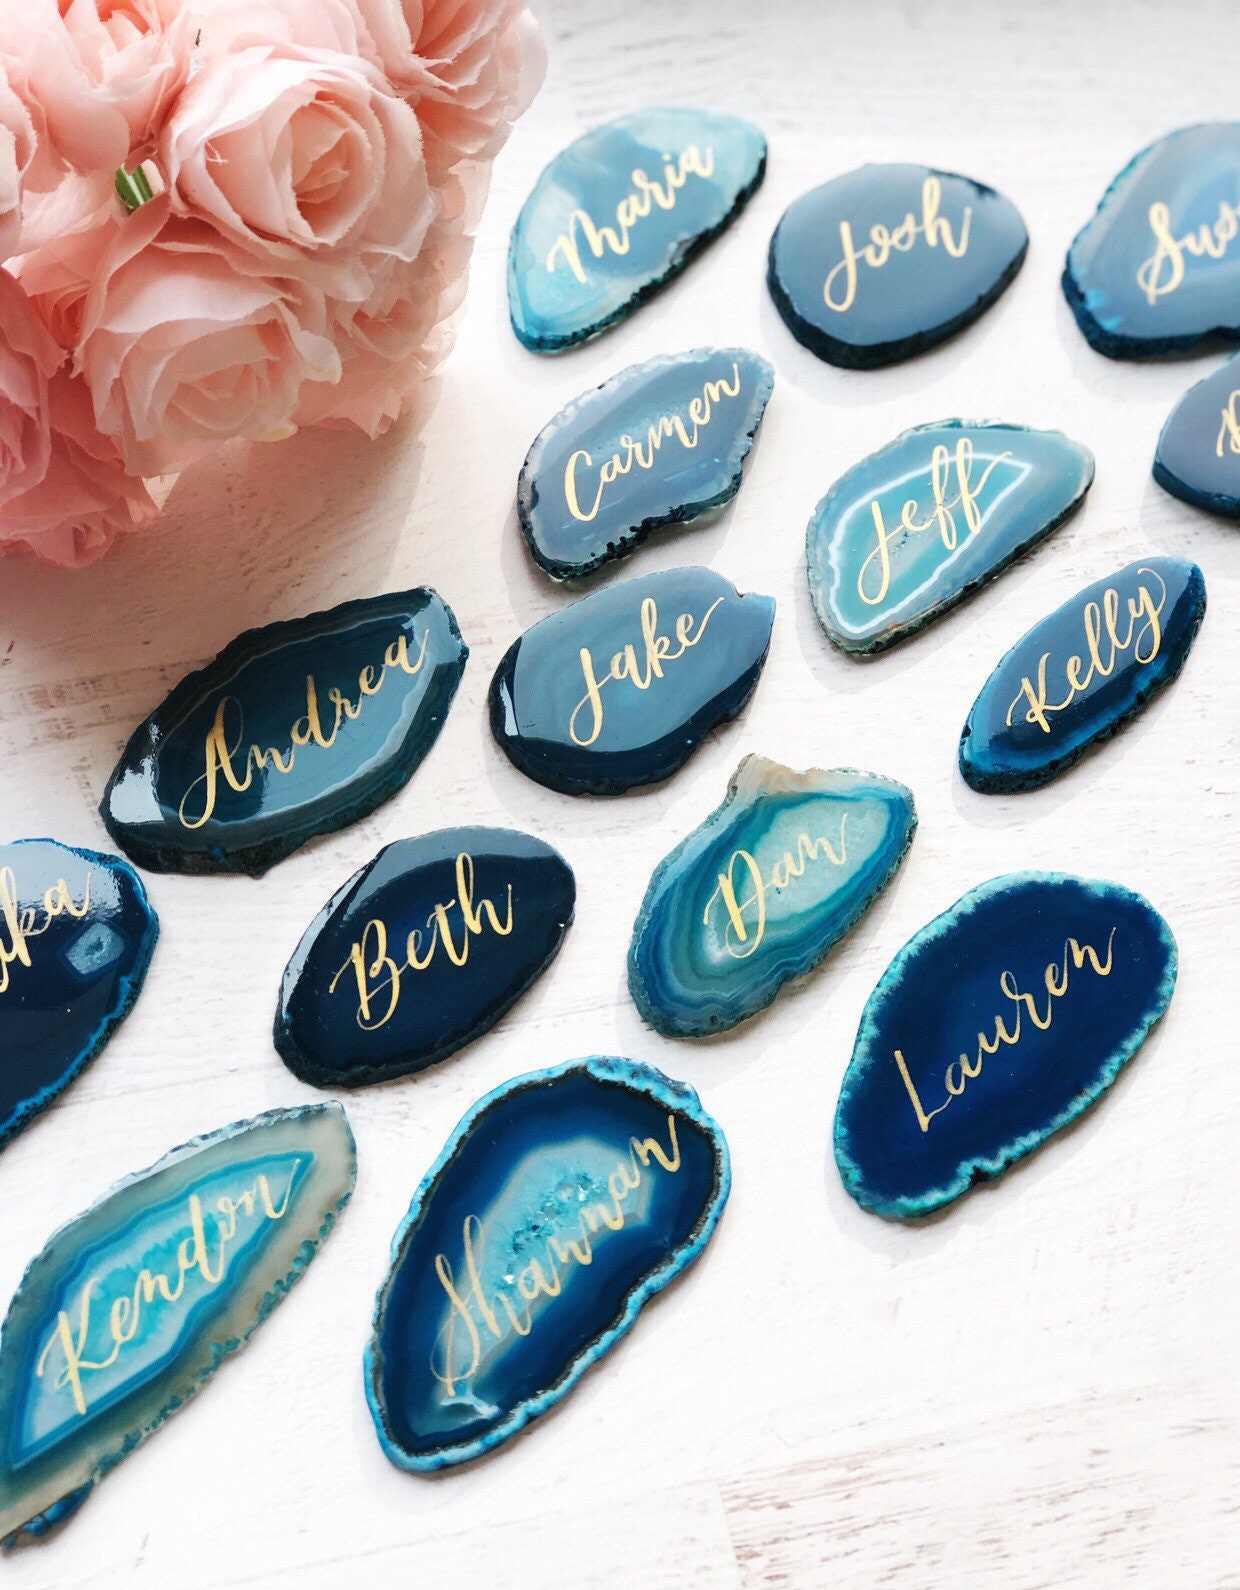 2.5" - 3" Teal Agate Slice Calligraphy Name Place Cards | Agate Calligraphy Name Cards